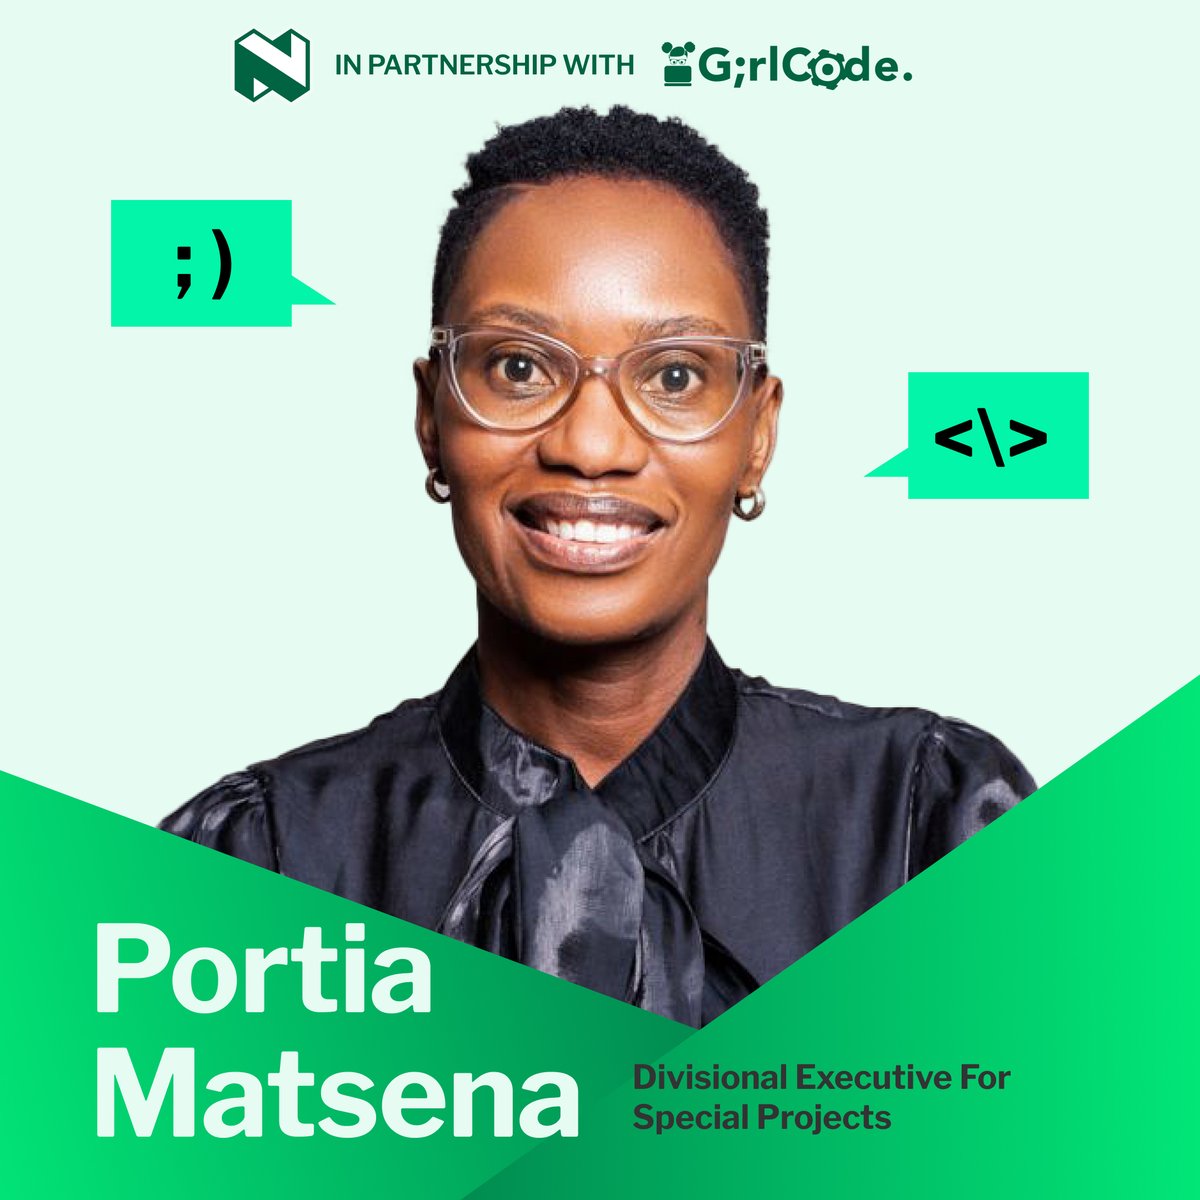 Portia Matsena is the Divisional Executive for Special Projects, for our Intelligent Hyperautomation programme. She is committed to continuous learning and the empowerment of others. Portia’s talk draws from a deep well of experience in the IT field. #NedbankXGirlCode